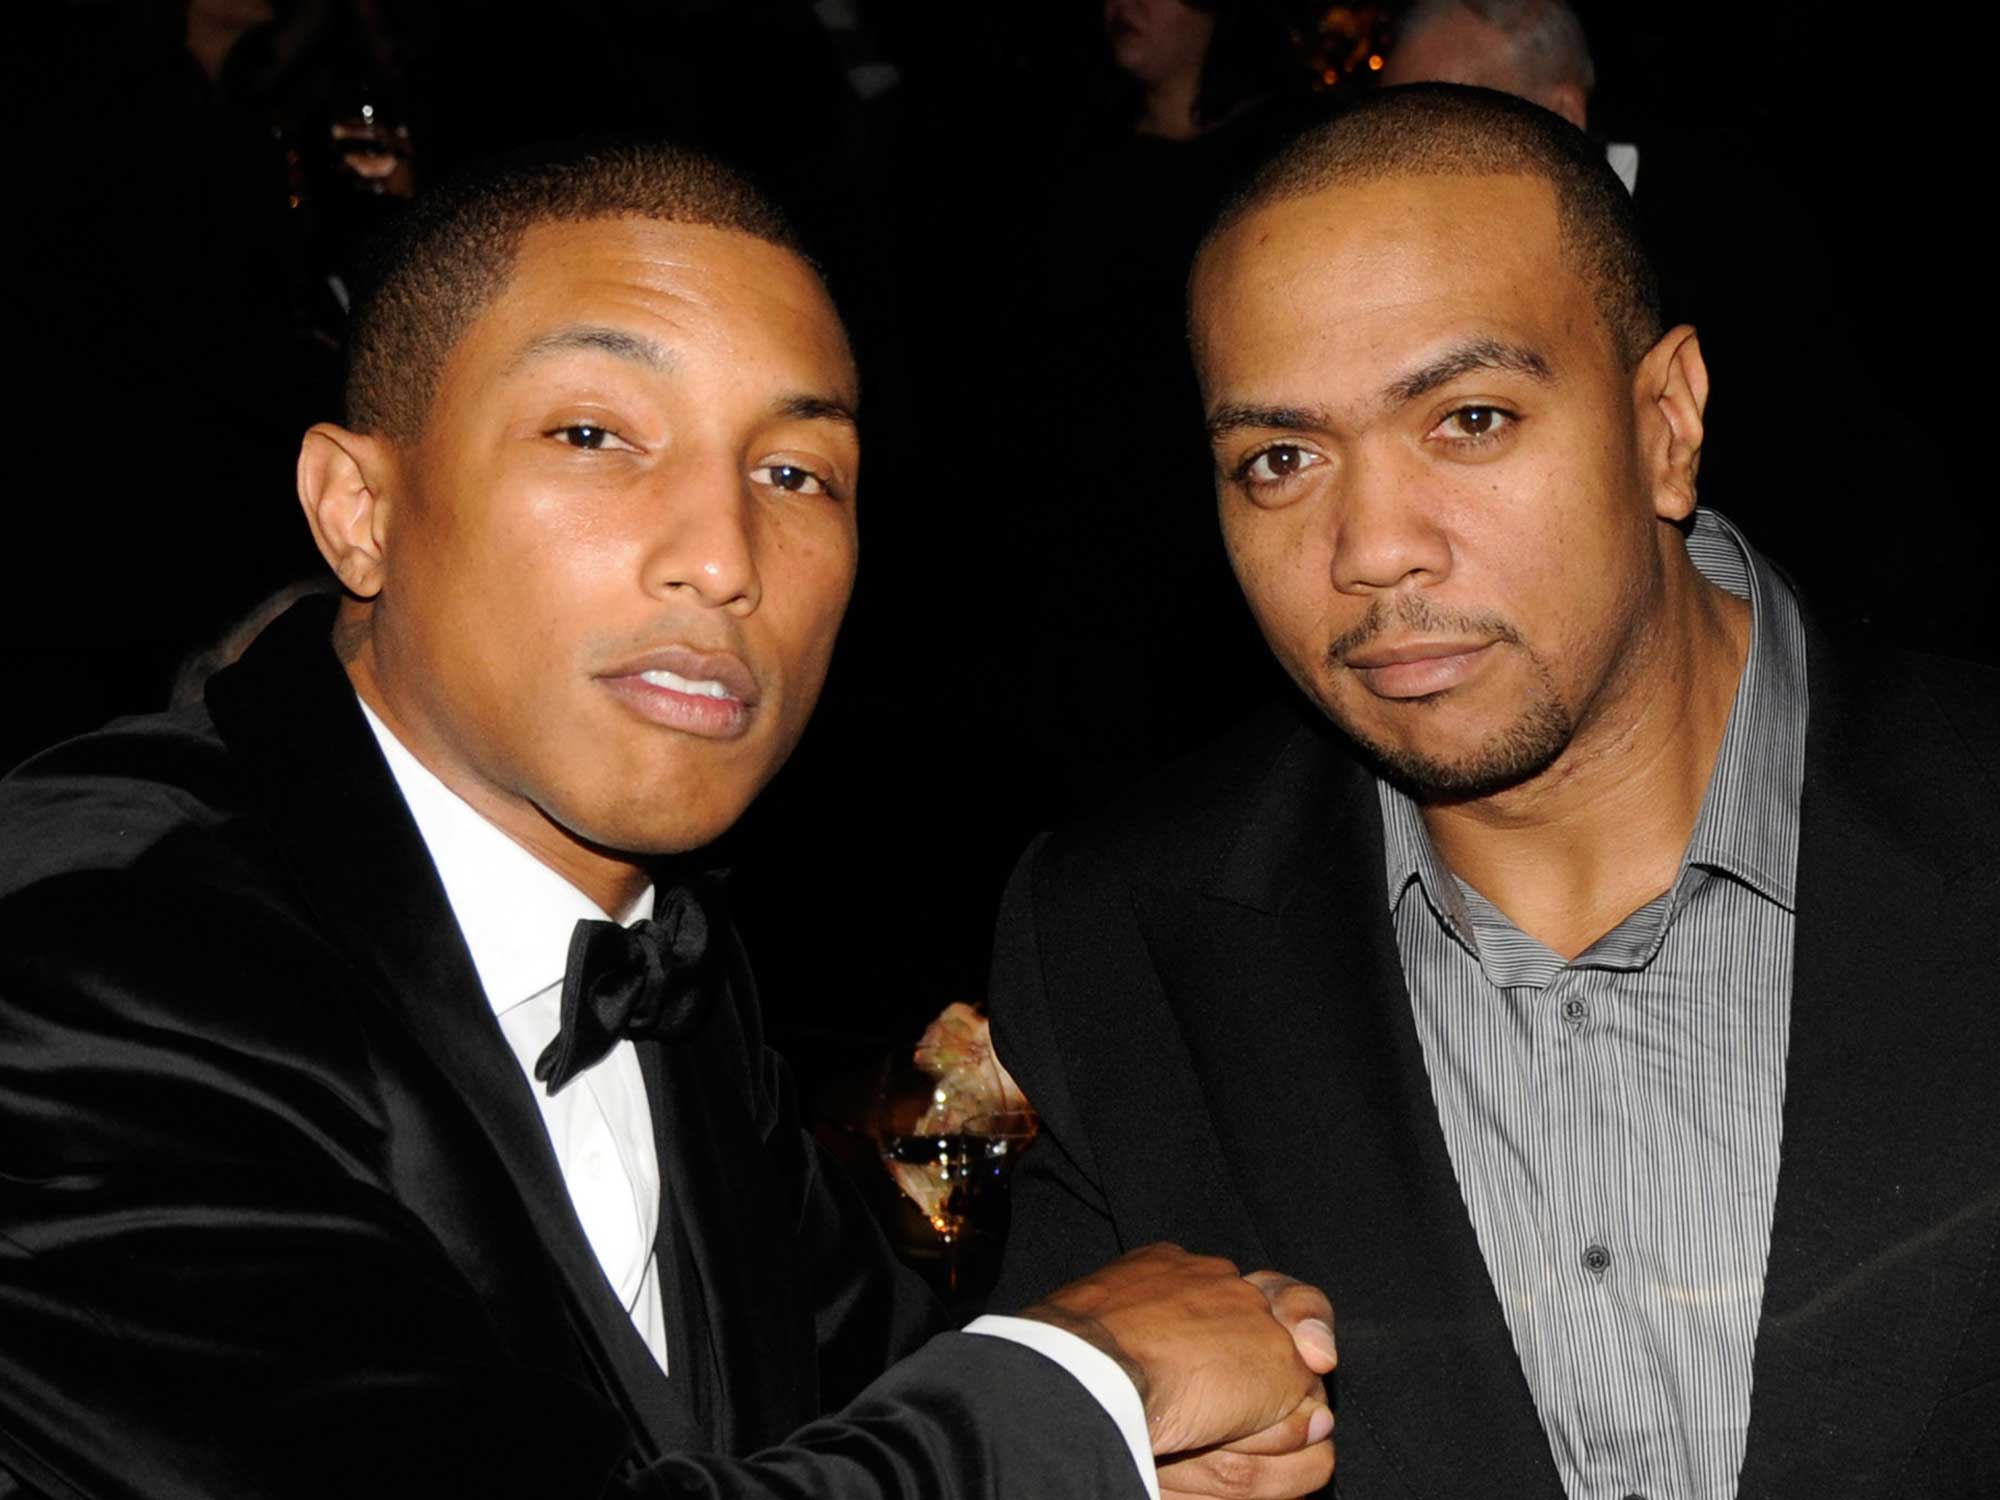 Pharrell Williams and Timbaland inside Madonna and Gucci Host "A Night to Benefit Raising Malawi and UNICEF" at the United Nations on February 6, 2007 in New York City